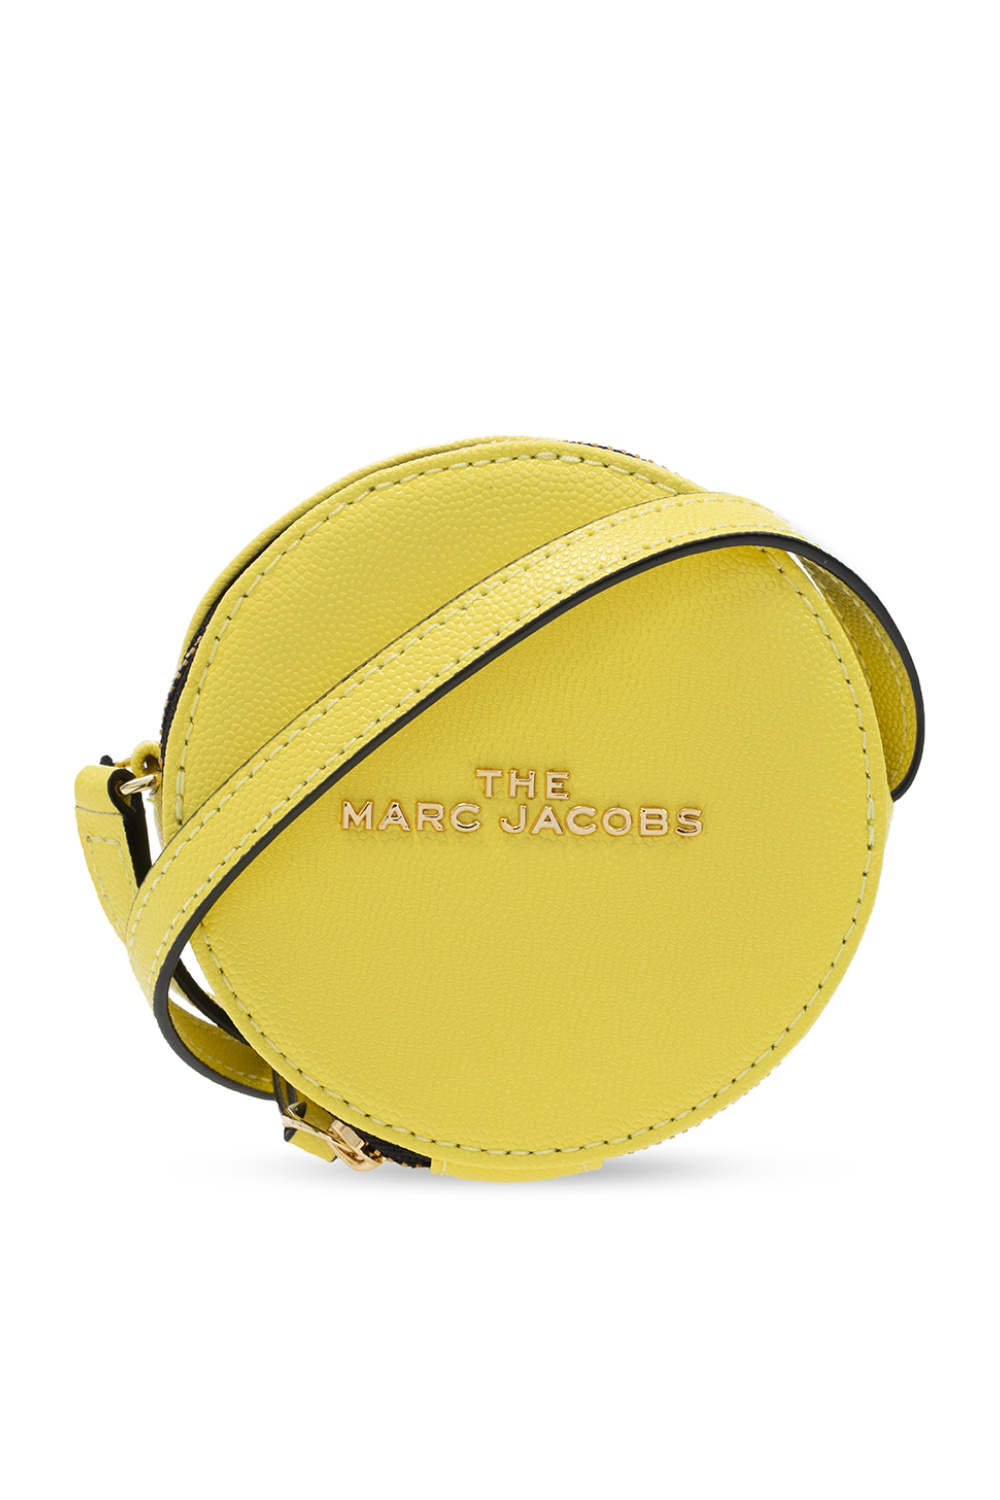 Marc Jacobs (The) Marc Jacobs logo-lettered purse